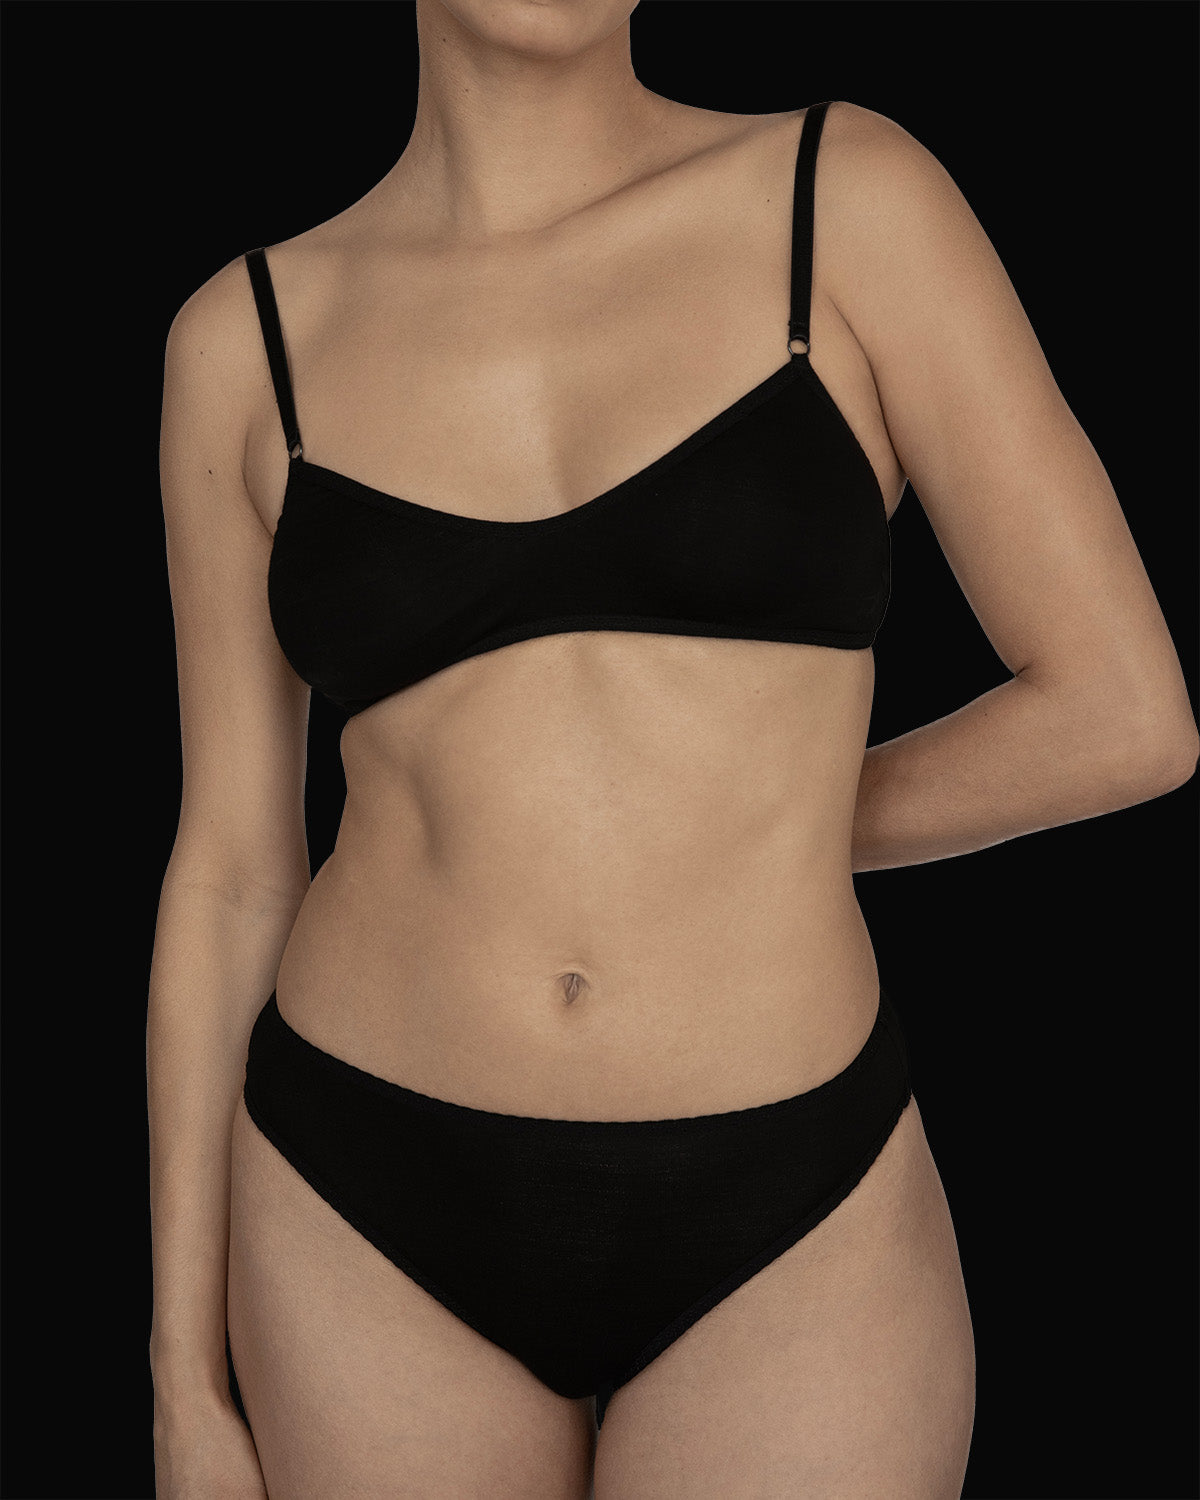 The Kye Intimates Recline Bra in the color Black. A gentle, pullover scoop neck bra, with adjustable shoulder straps. A double layered bamboo bra that is designed to provide maximum comfort.